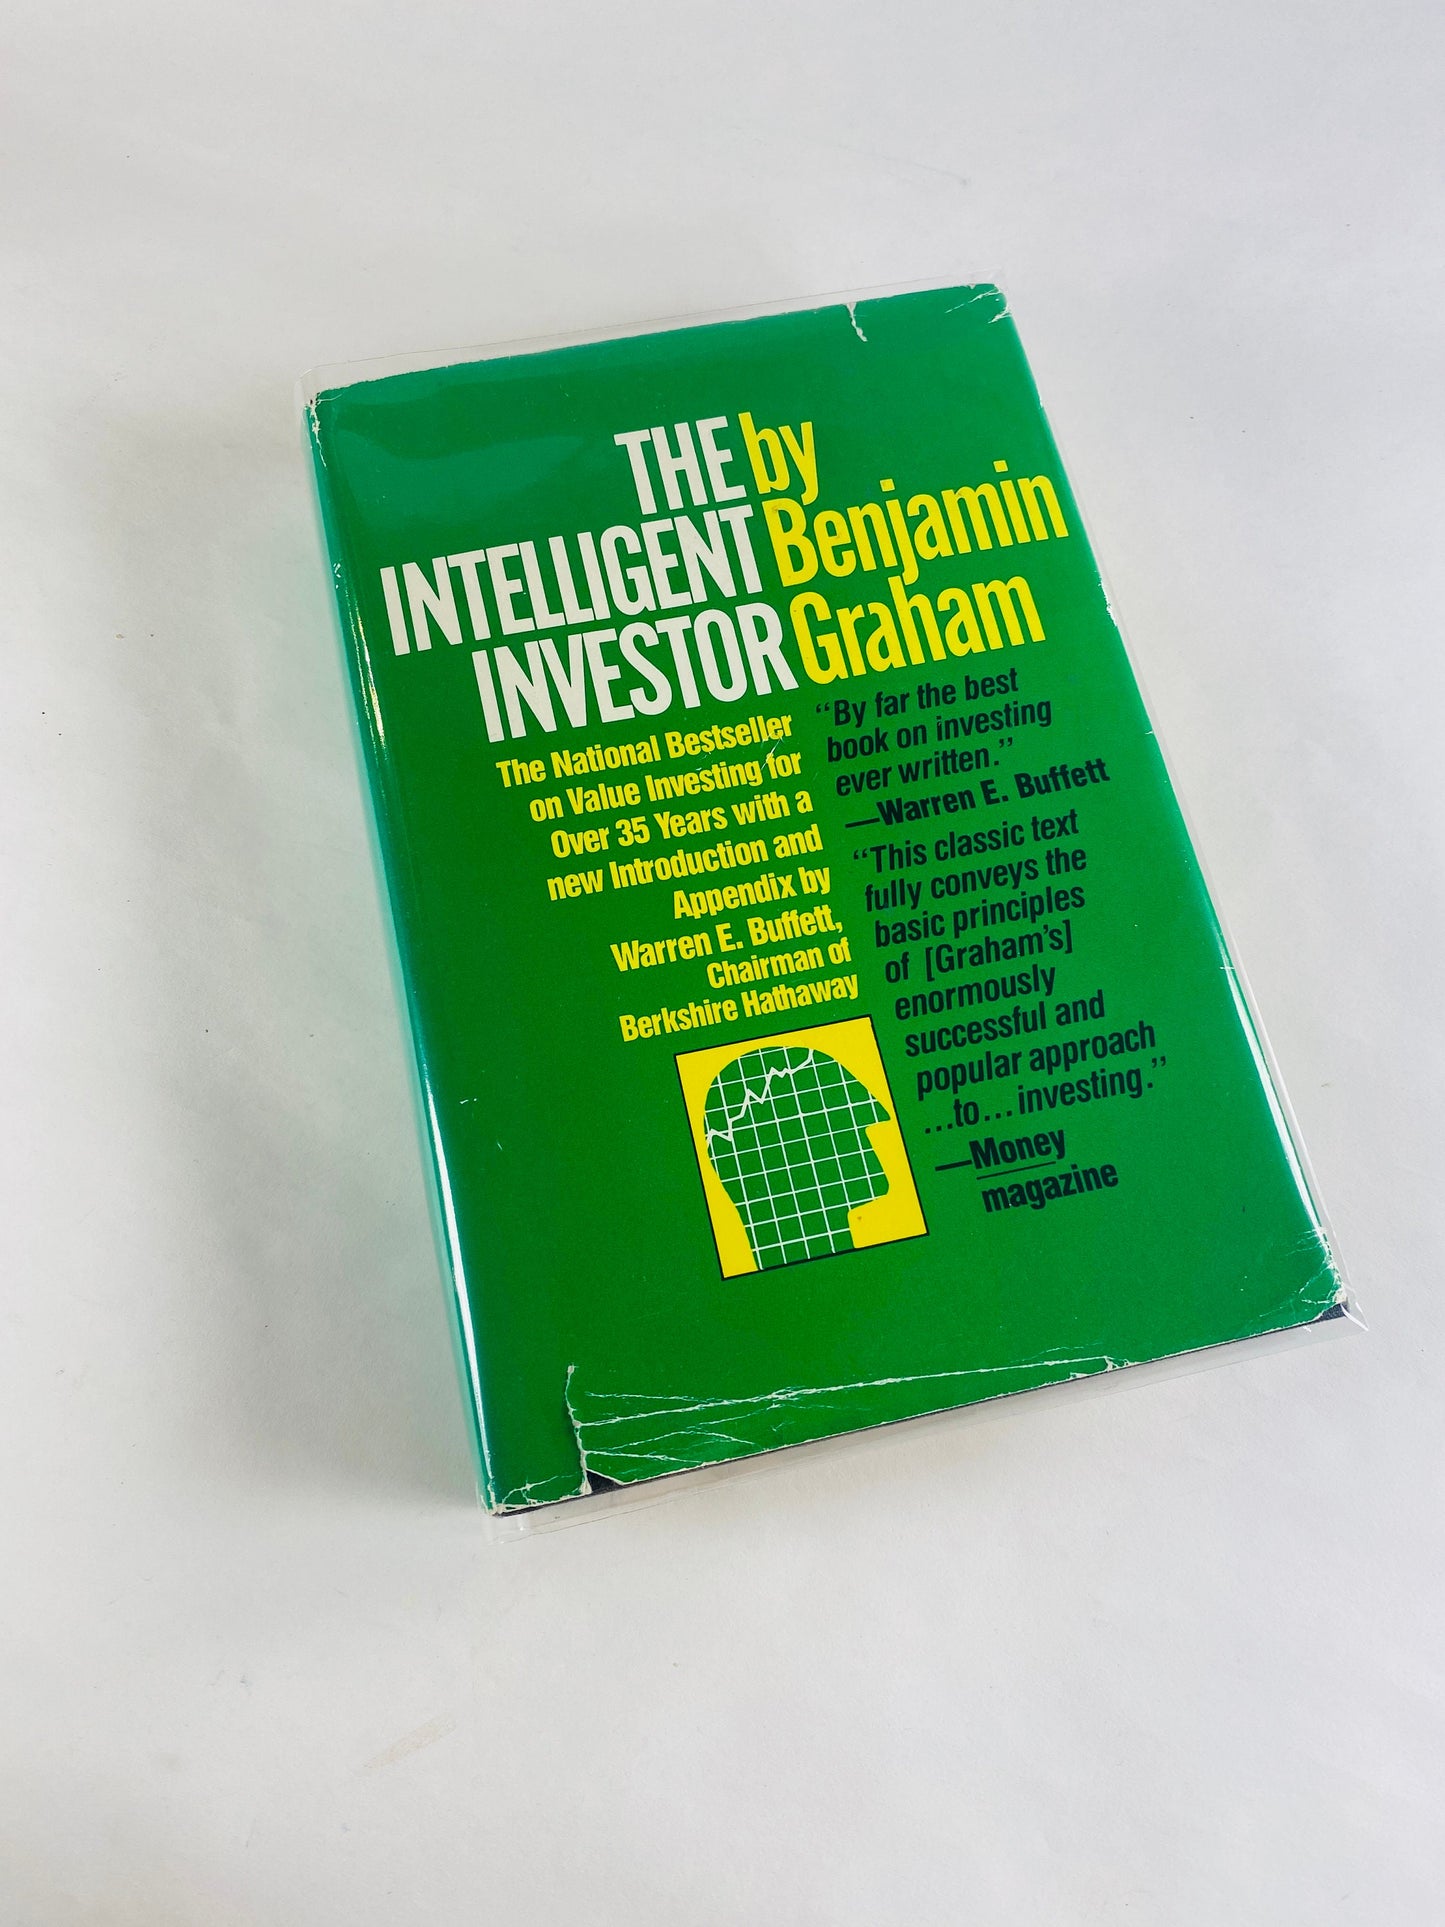 Intelligent Investor vintage book by Benjamin Graham circa 1986 Practical Counsel stock market collectible Father's Day gift Wall Street